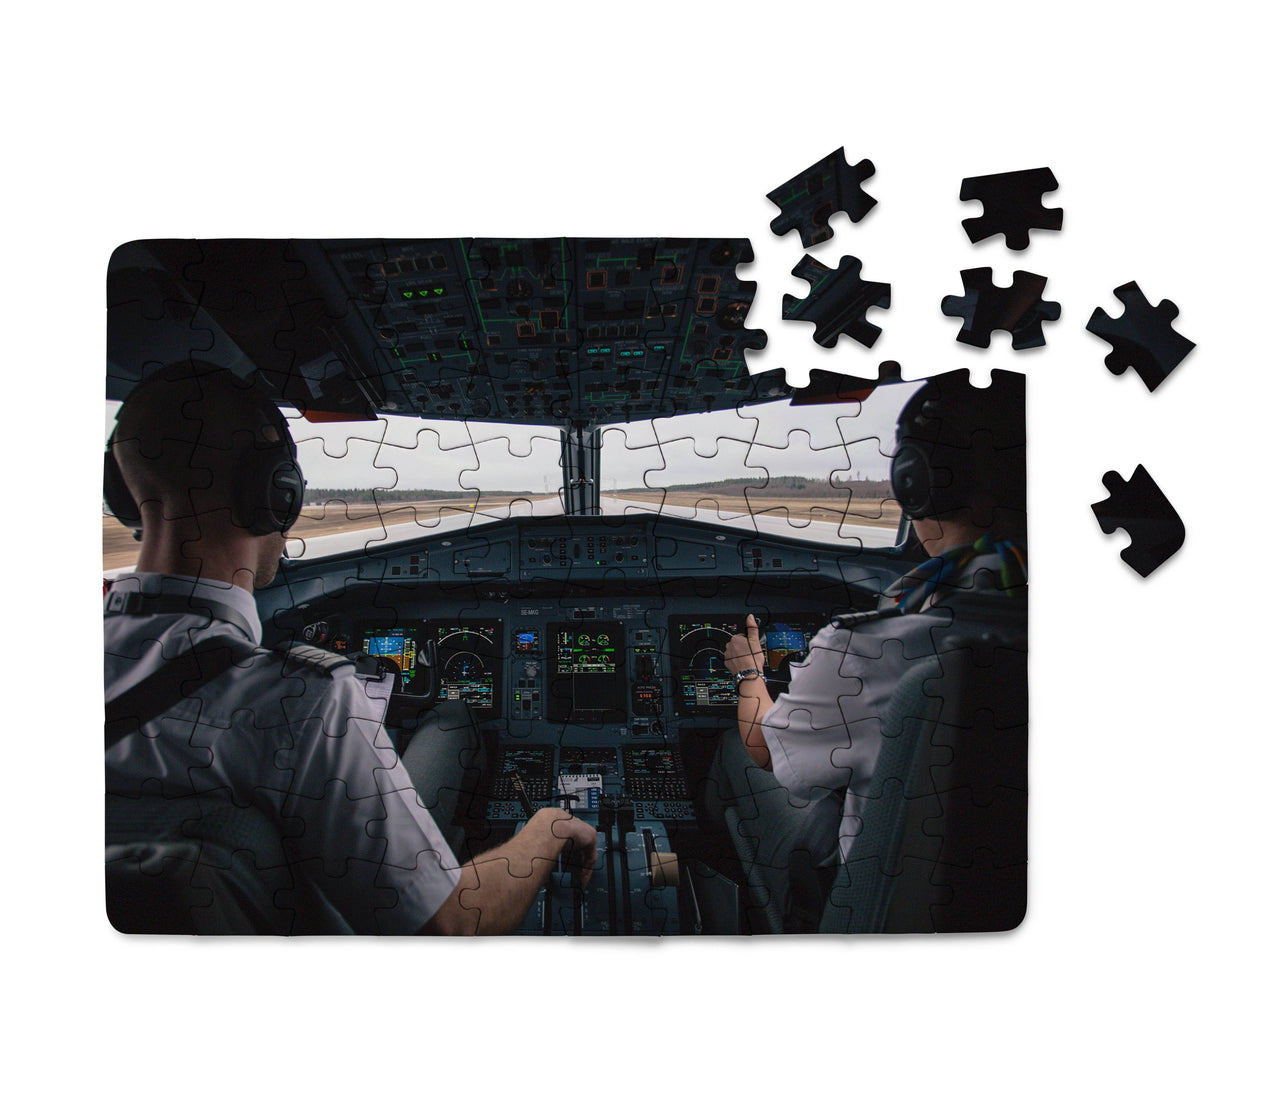 Departing Aircraft's Cockpit Printed Puzzles Aviation Shop 